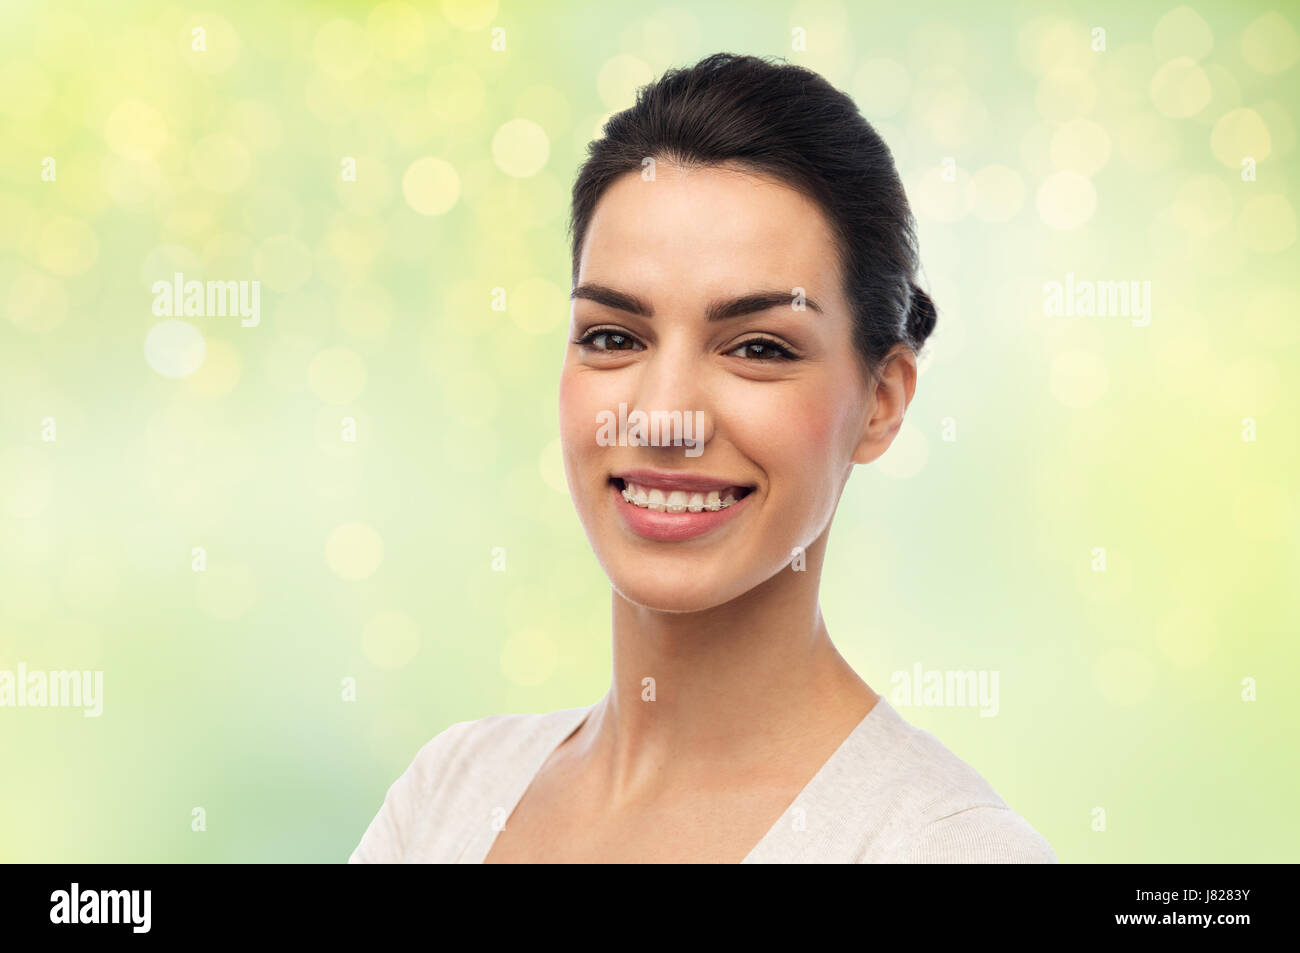 Happy smiling young woman with braces Banque D'Images